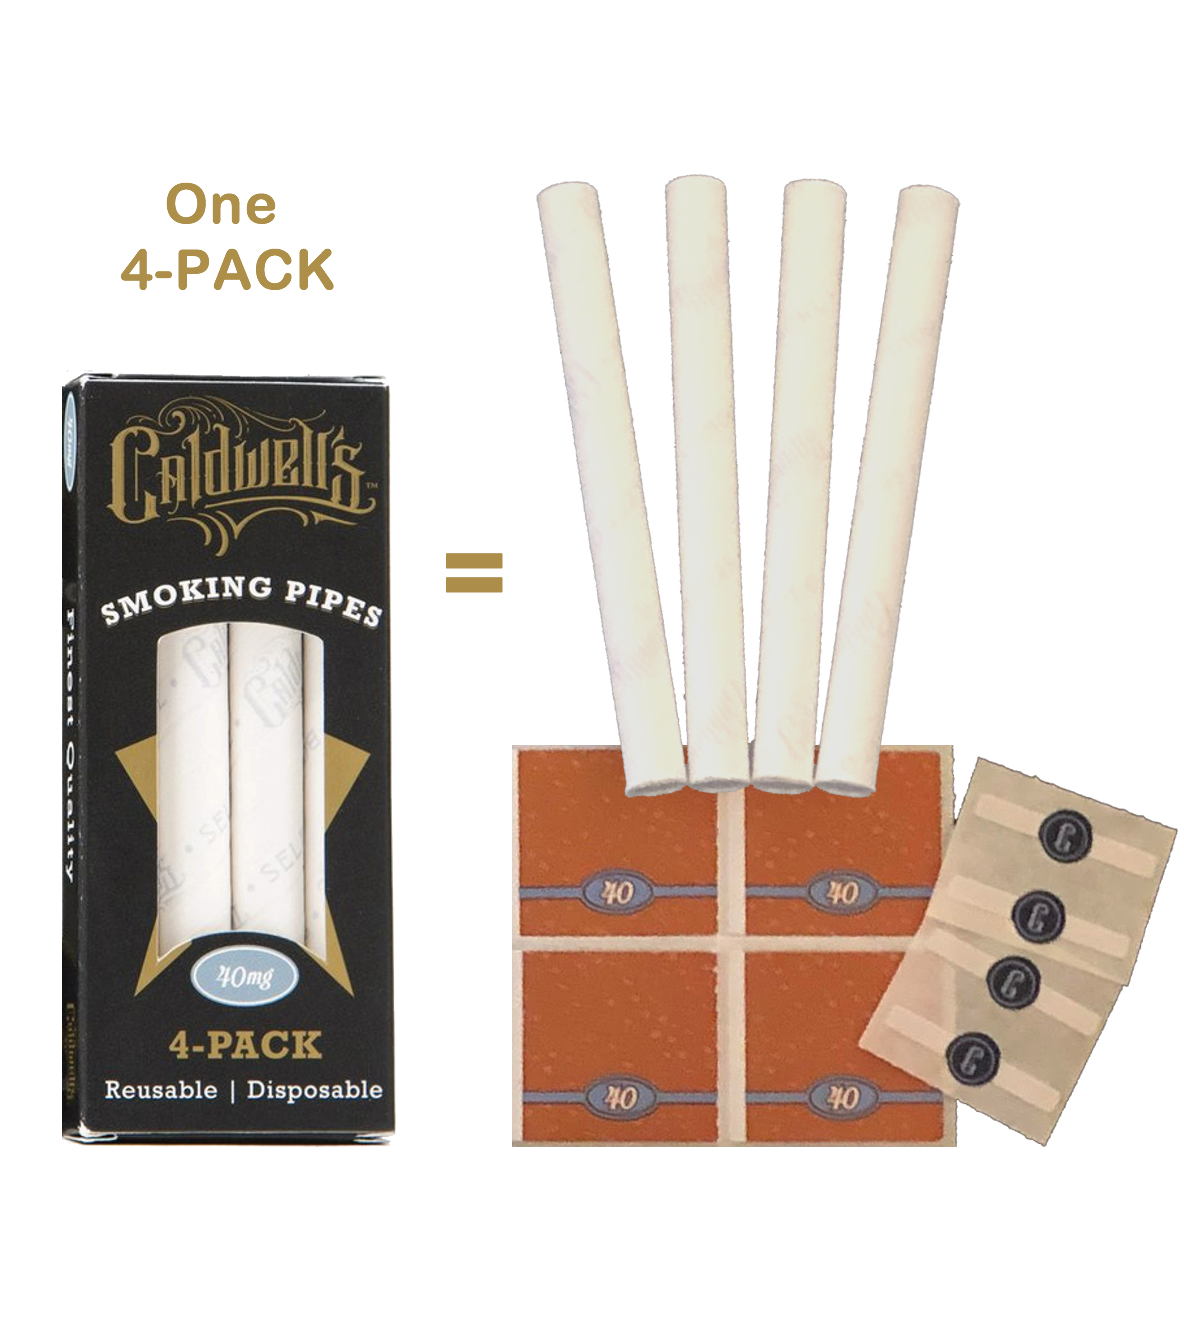 https://caldwellspipes.com/wp-content/uploads/2018/04/One-4-PACK-PRODUCT.png